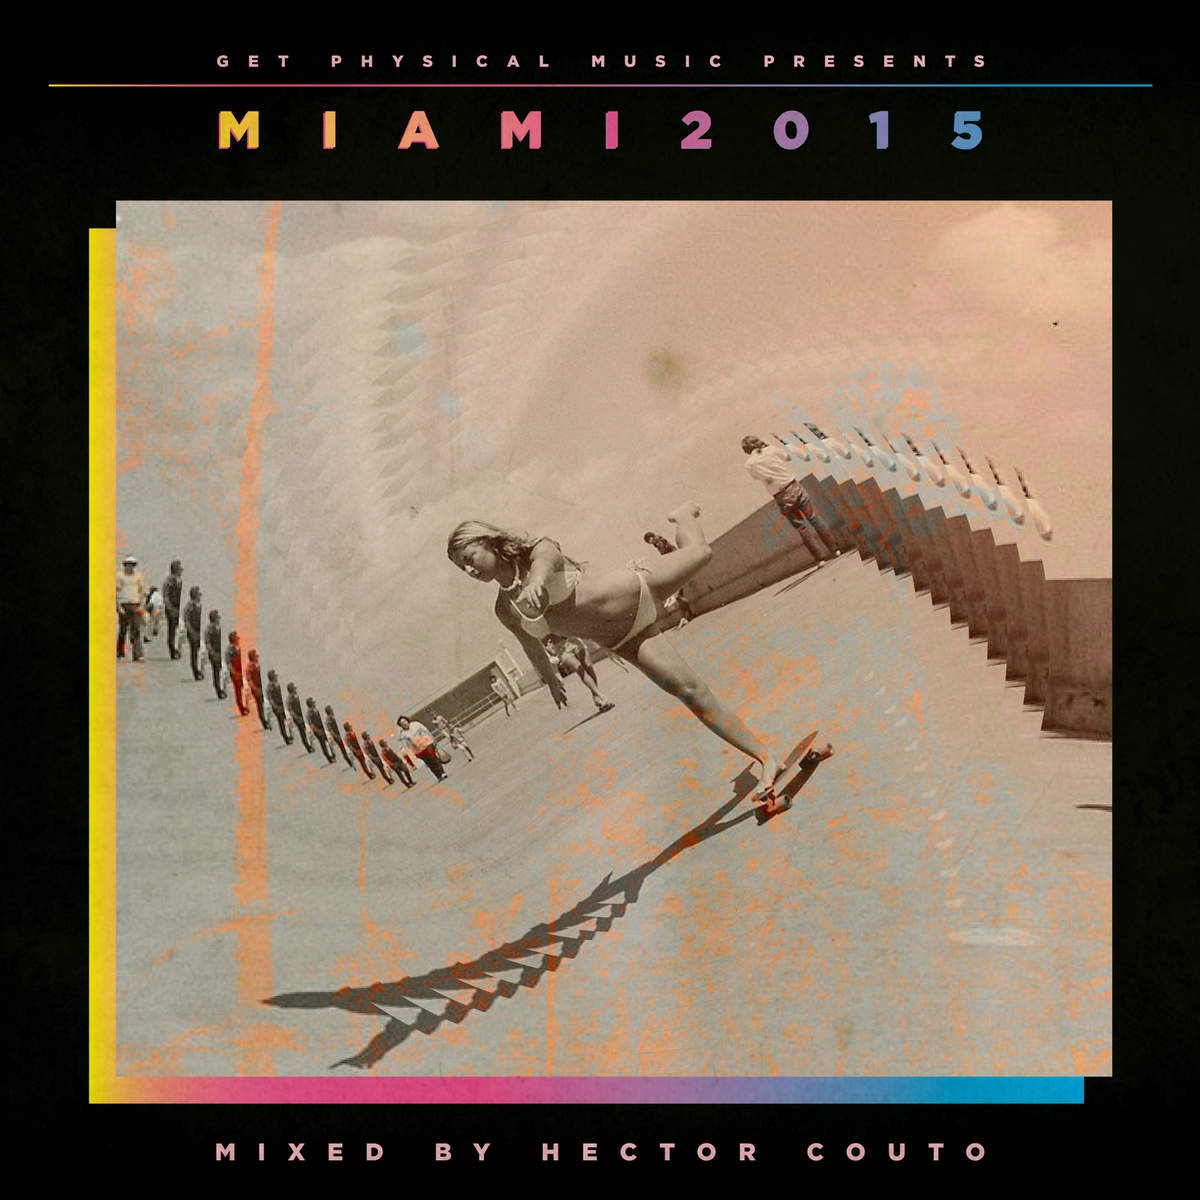 Get Physical Music Presents: Miami 2015